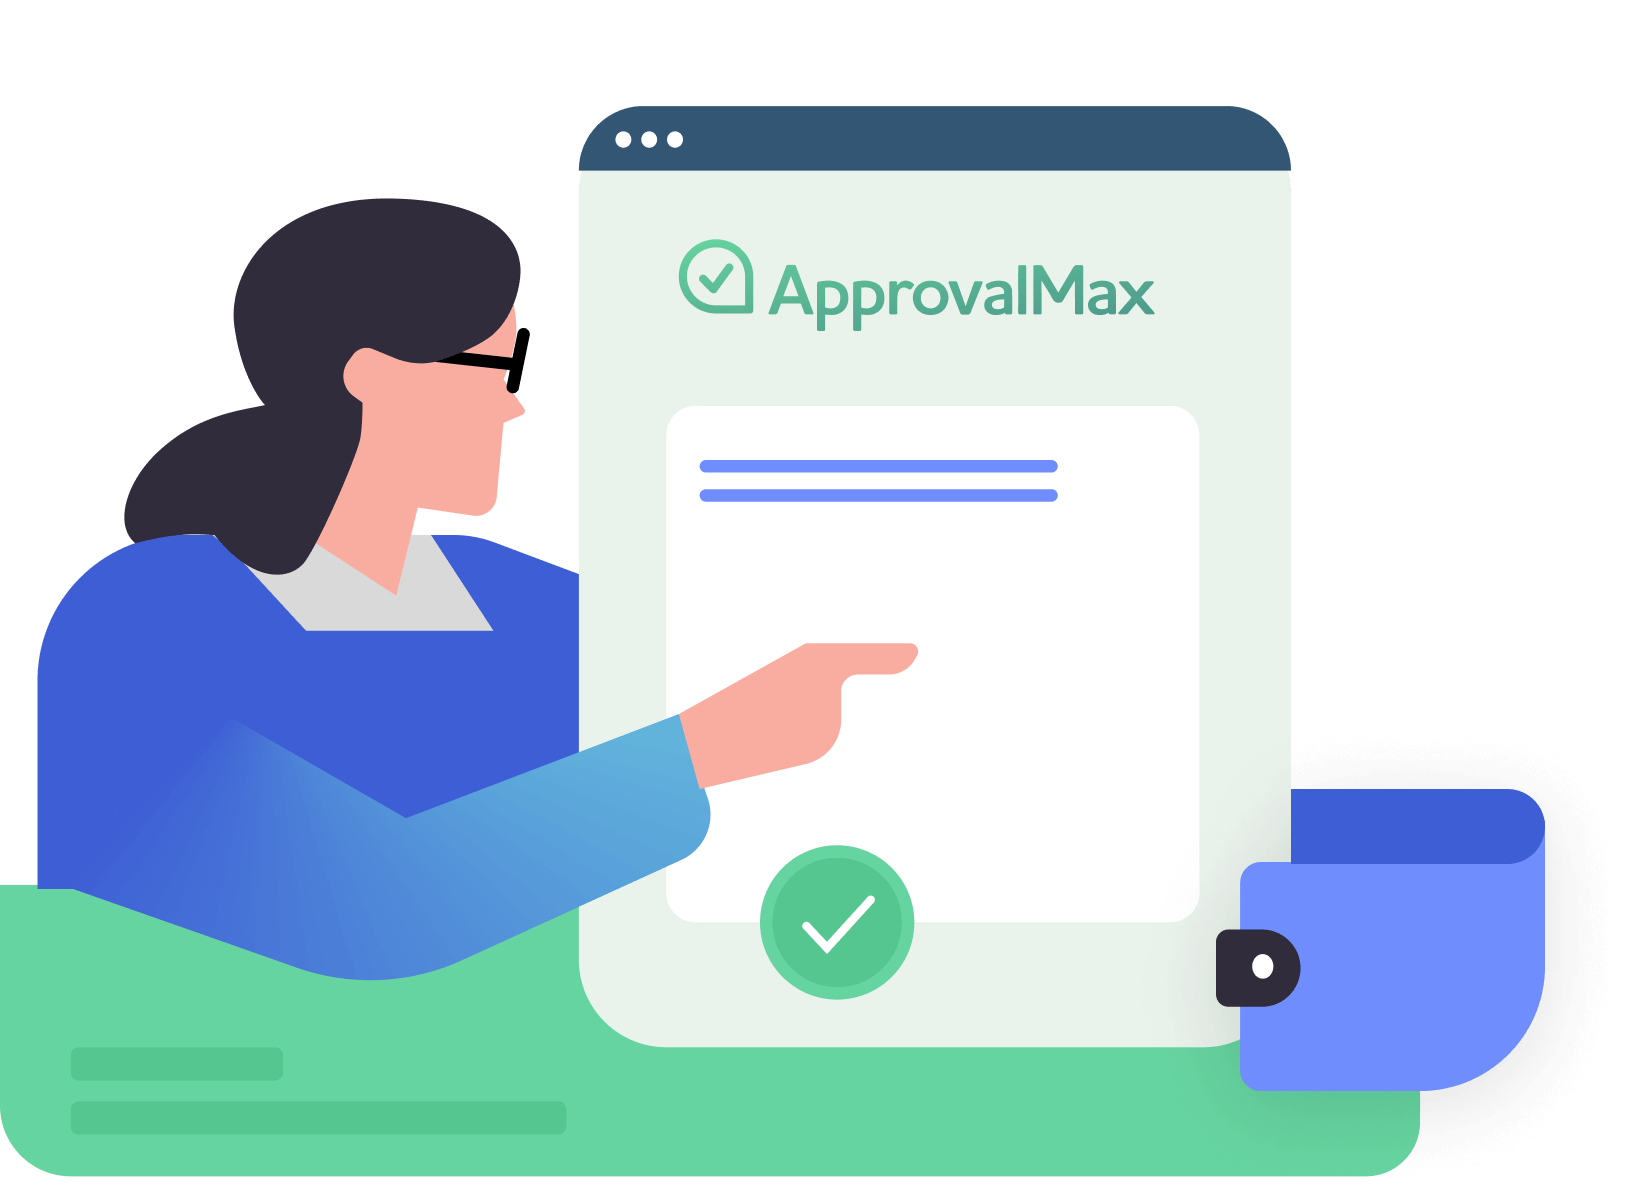 Cartoon woman points to a cartoon webpage with 'ApprovalMax' at the top of the page